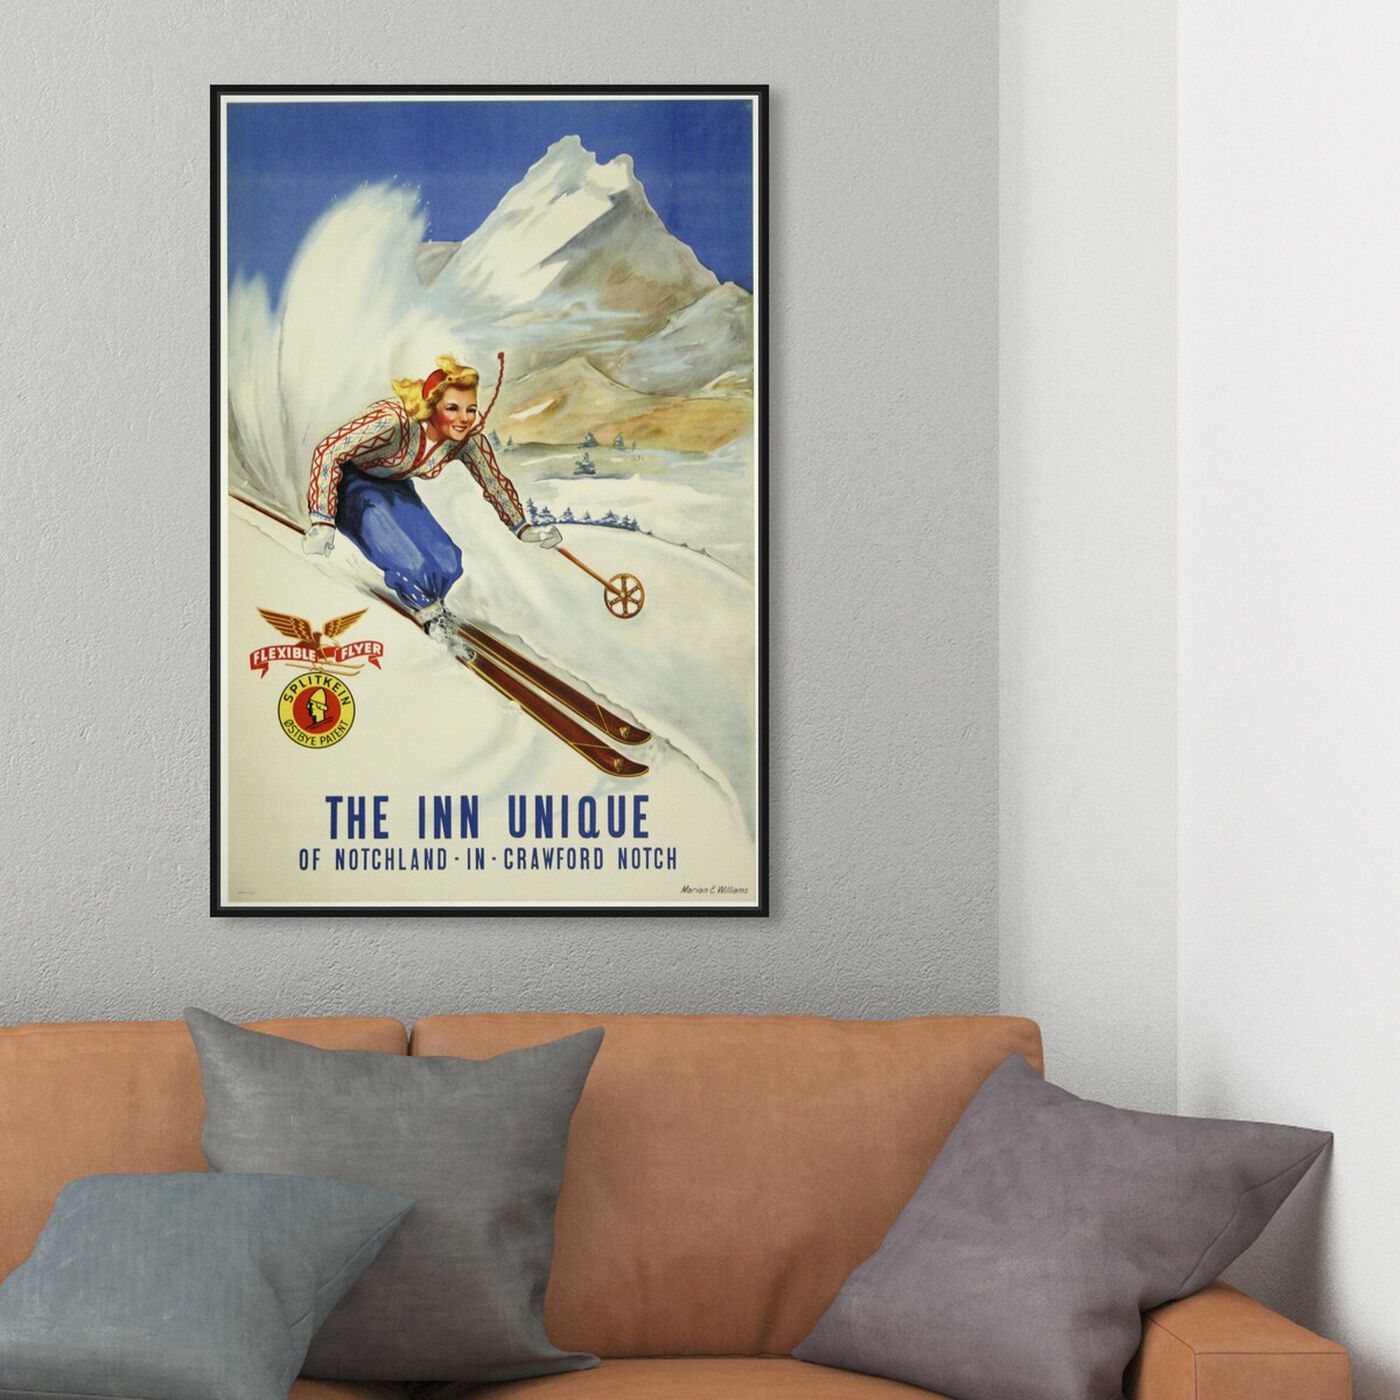 Hanging view of The Inn Unique featuring sports and teams and skiing art.